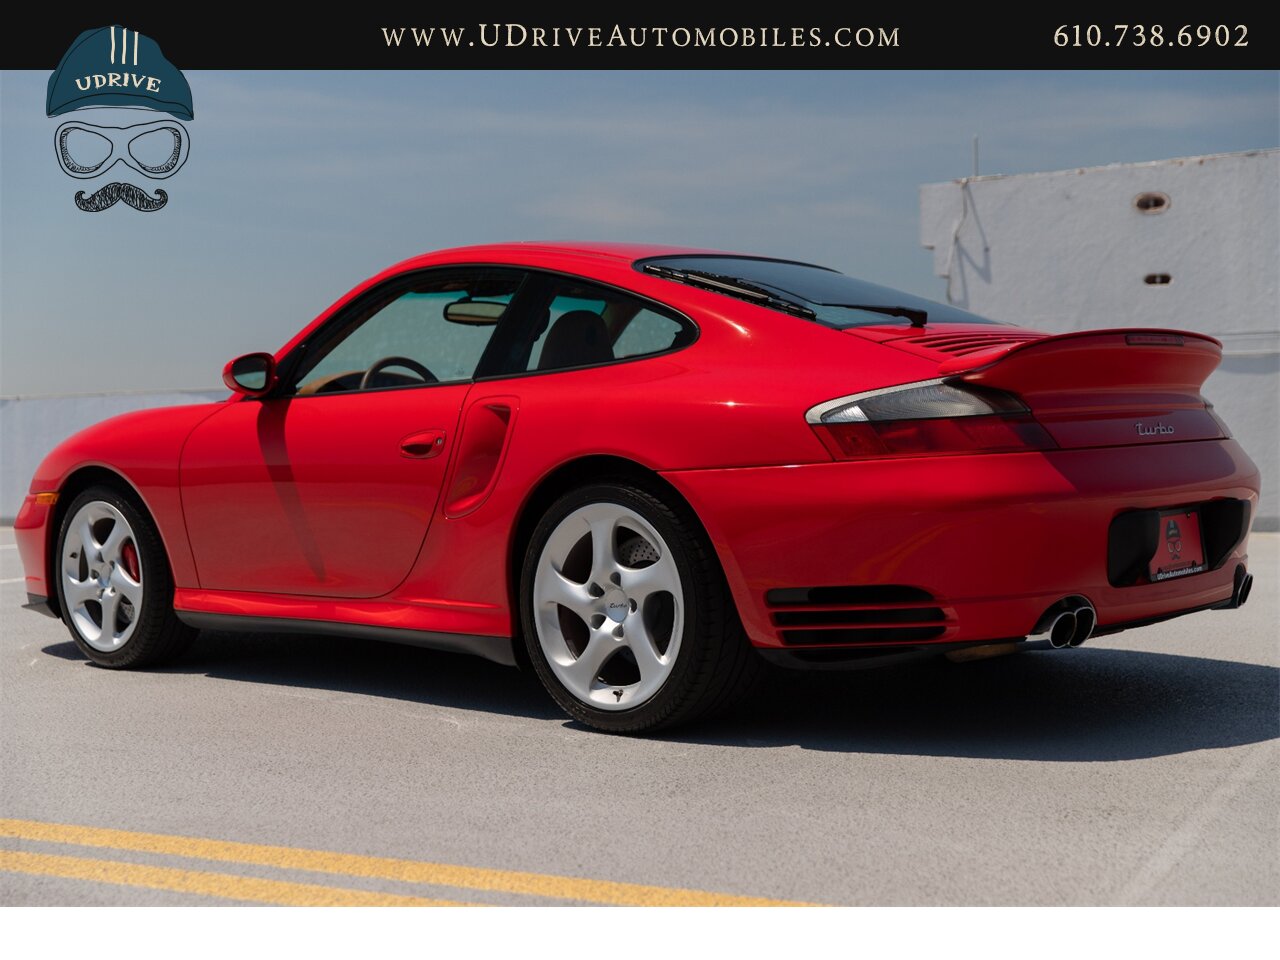 2003 Porsche 911 Turbo 996 Turbo X50 Power Kit 6 Speed Manual  Rare Color Guards Red over Brown Natural Leather - Photo 24 - West Chester, PA 19382